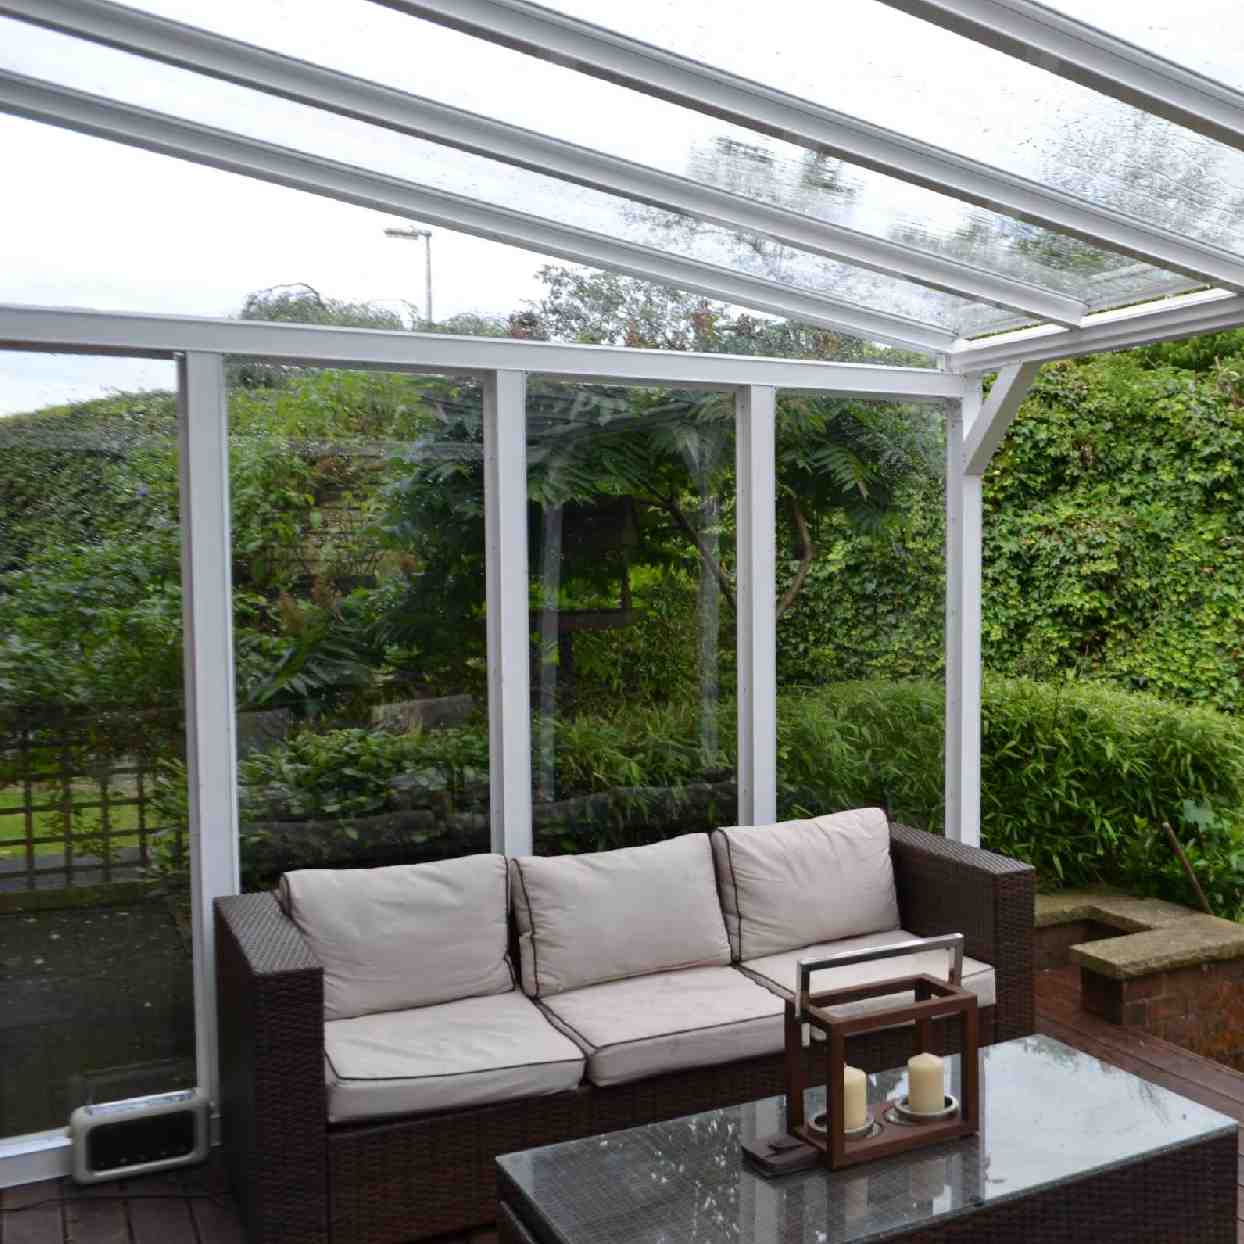 Buy Omega Verandah White with 16mm Polycarbonate Glazing - 3.1m (W) x 1.5m (P), (2) Supporting Posts online today